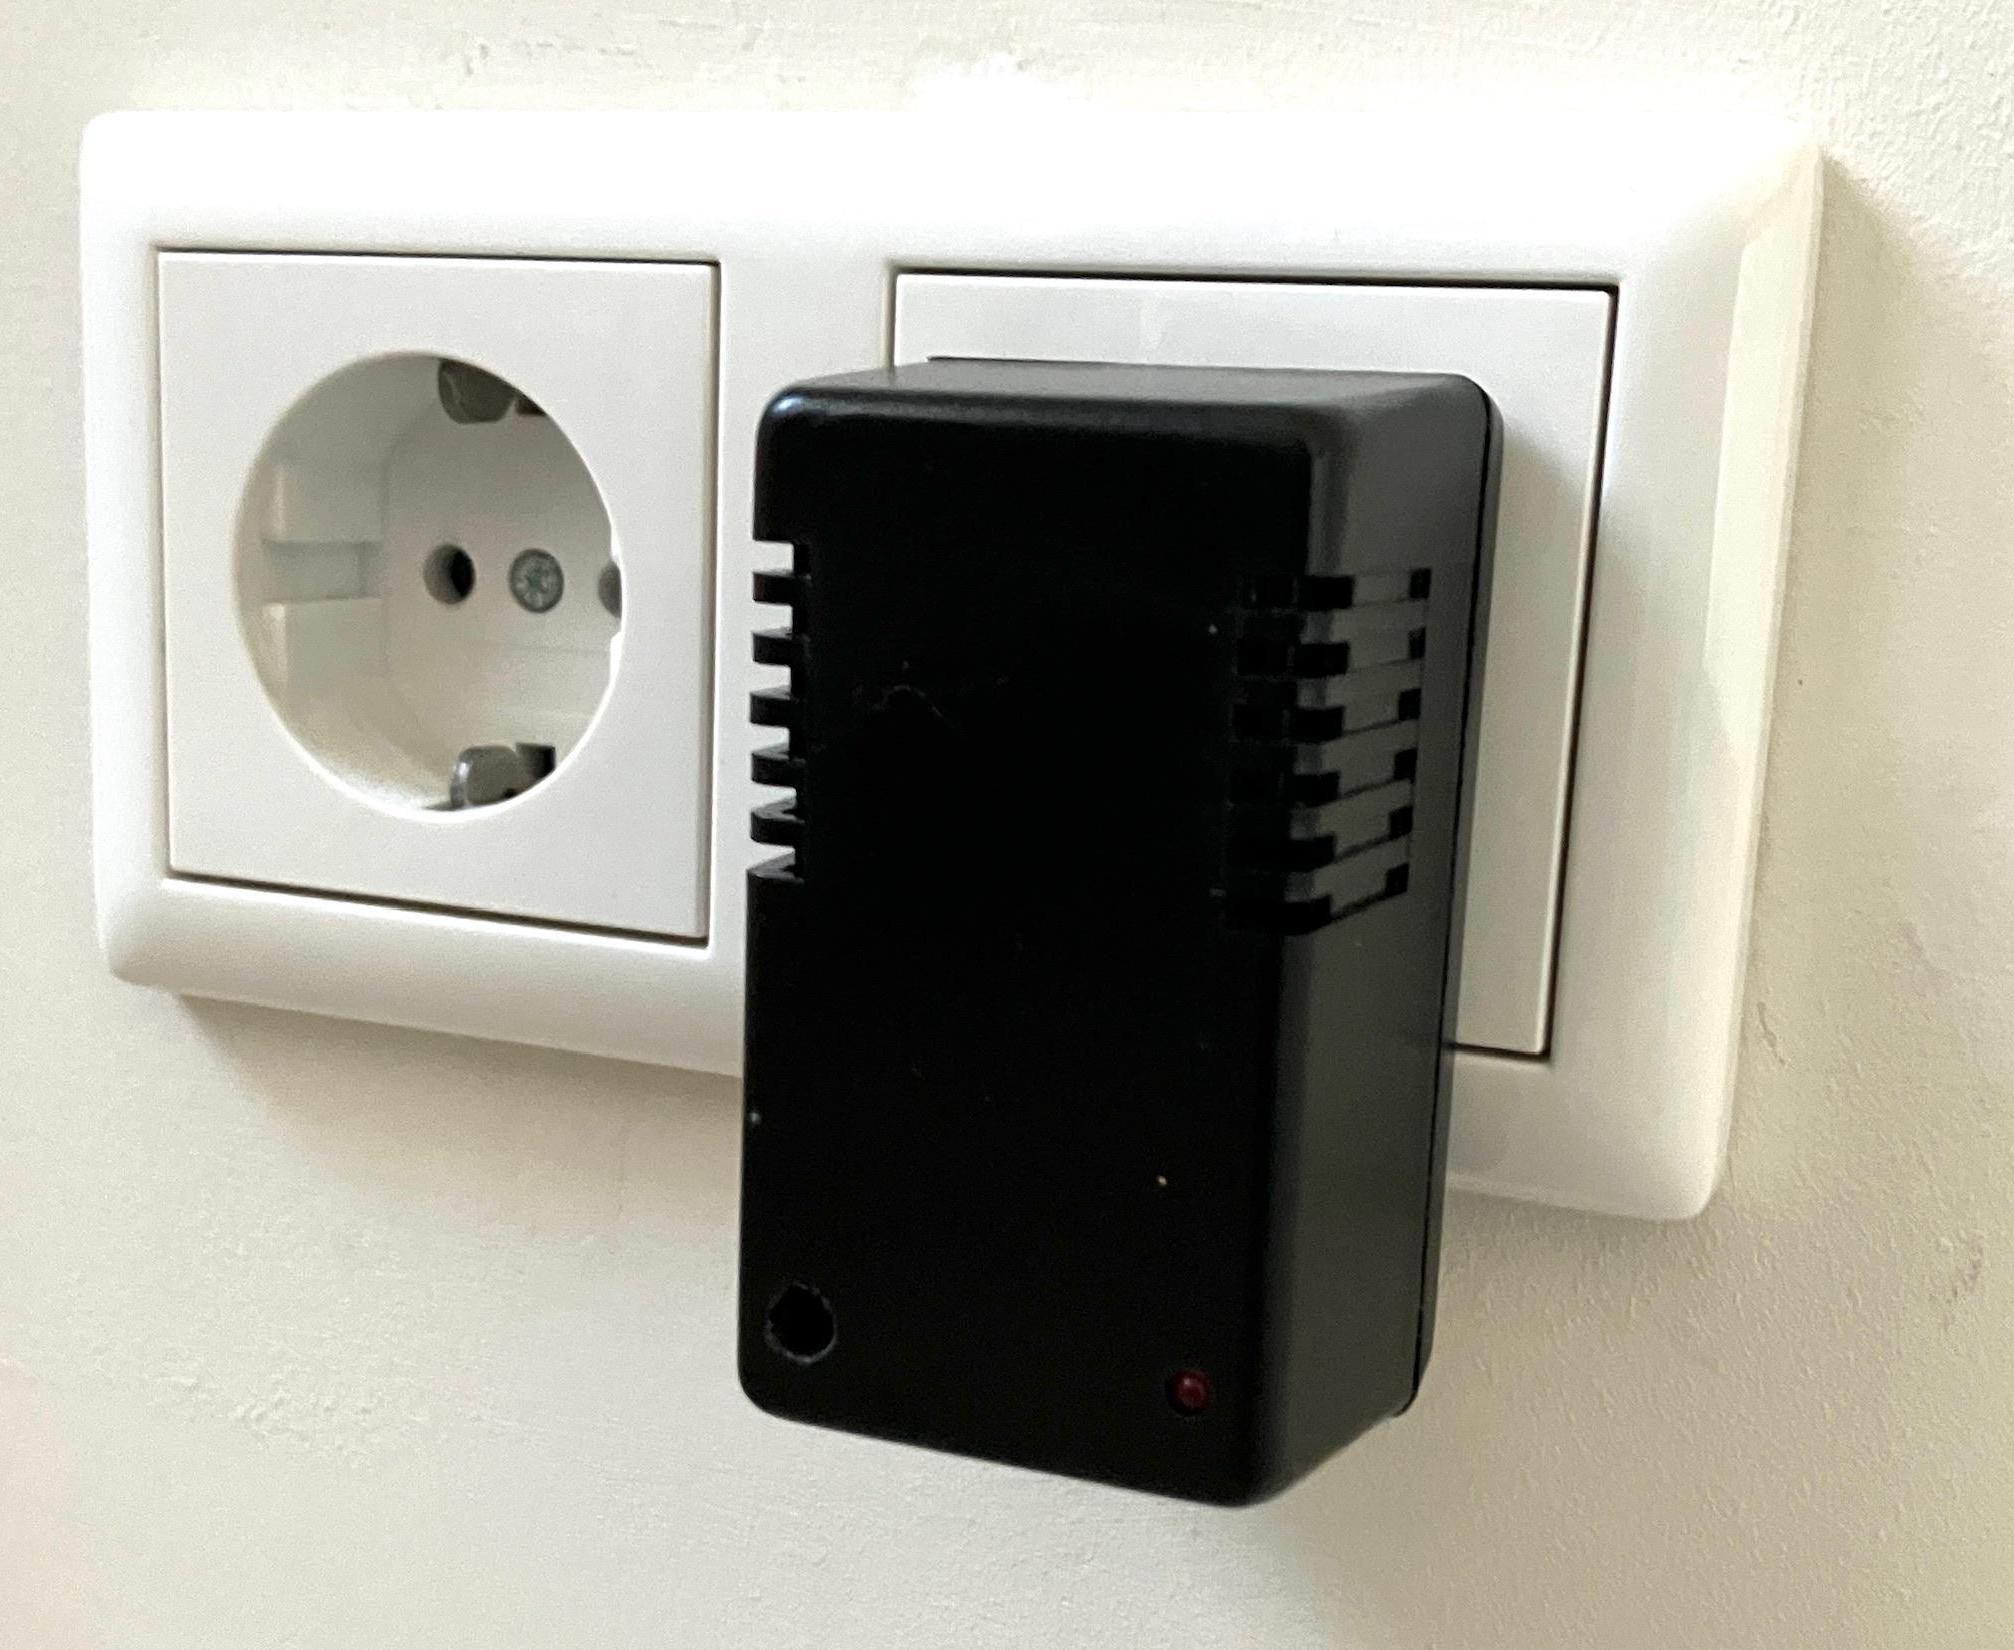 Fire-Alarm-Tone Detector to Open Roller Shutters